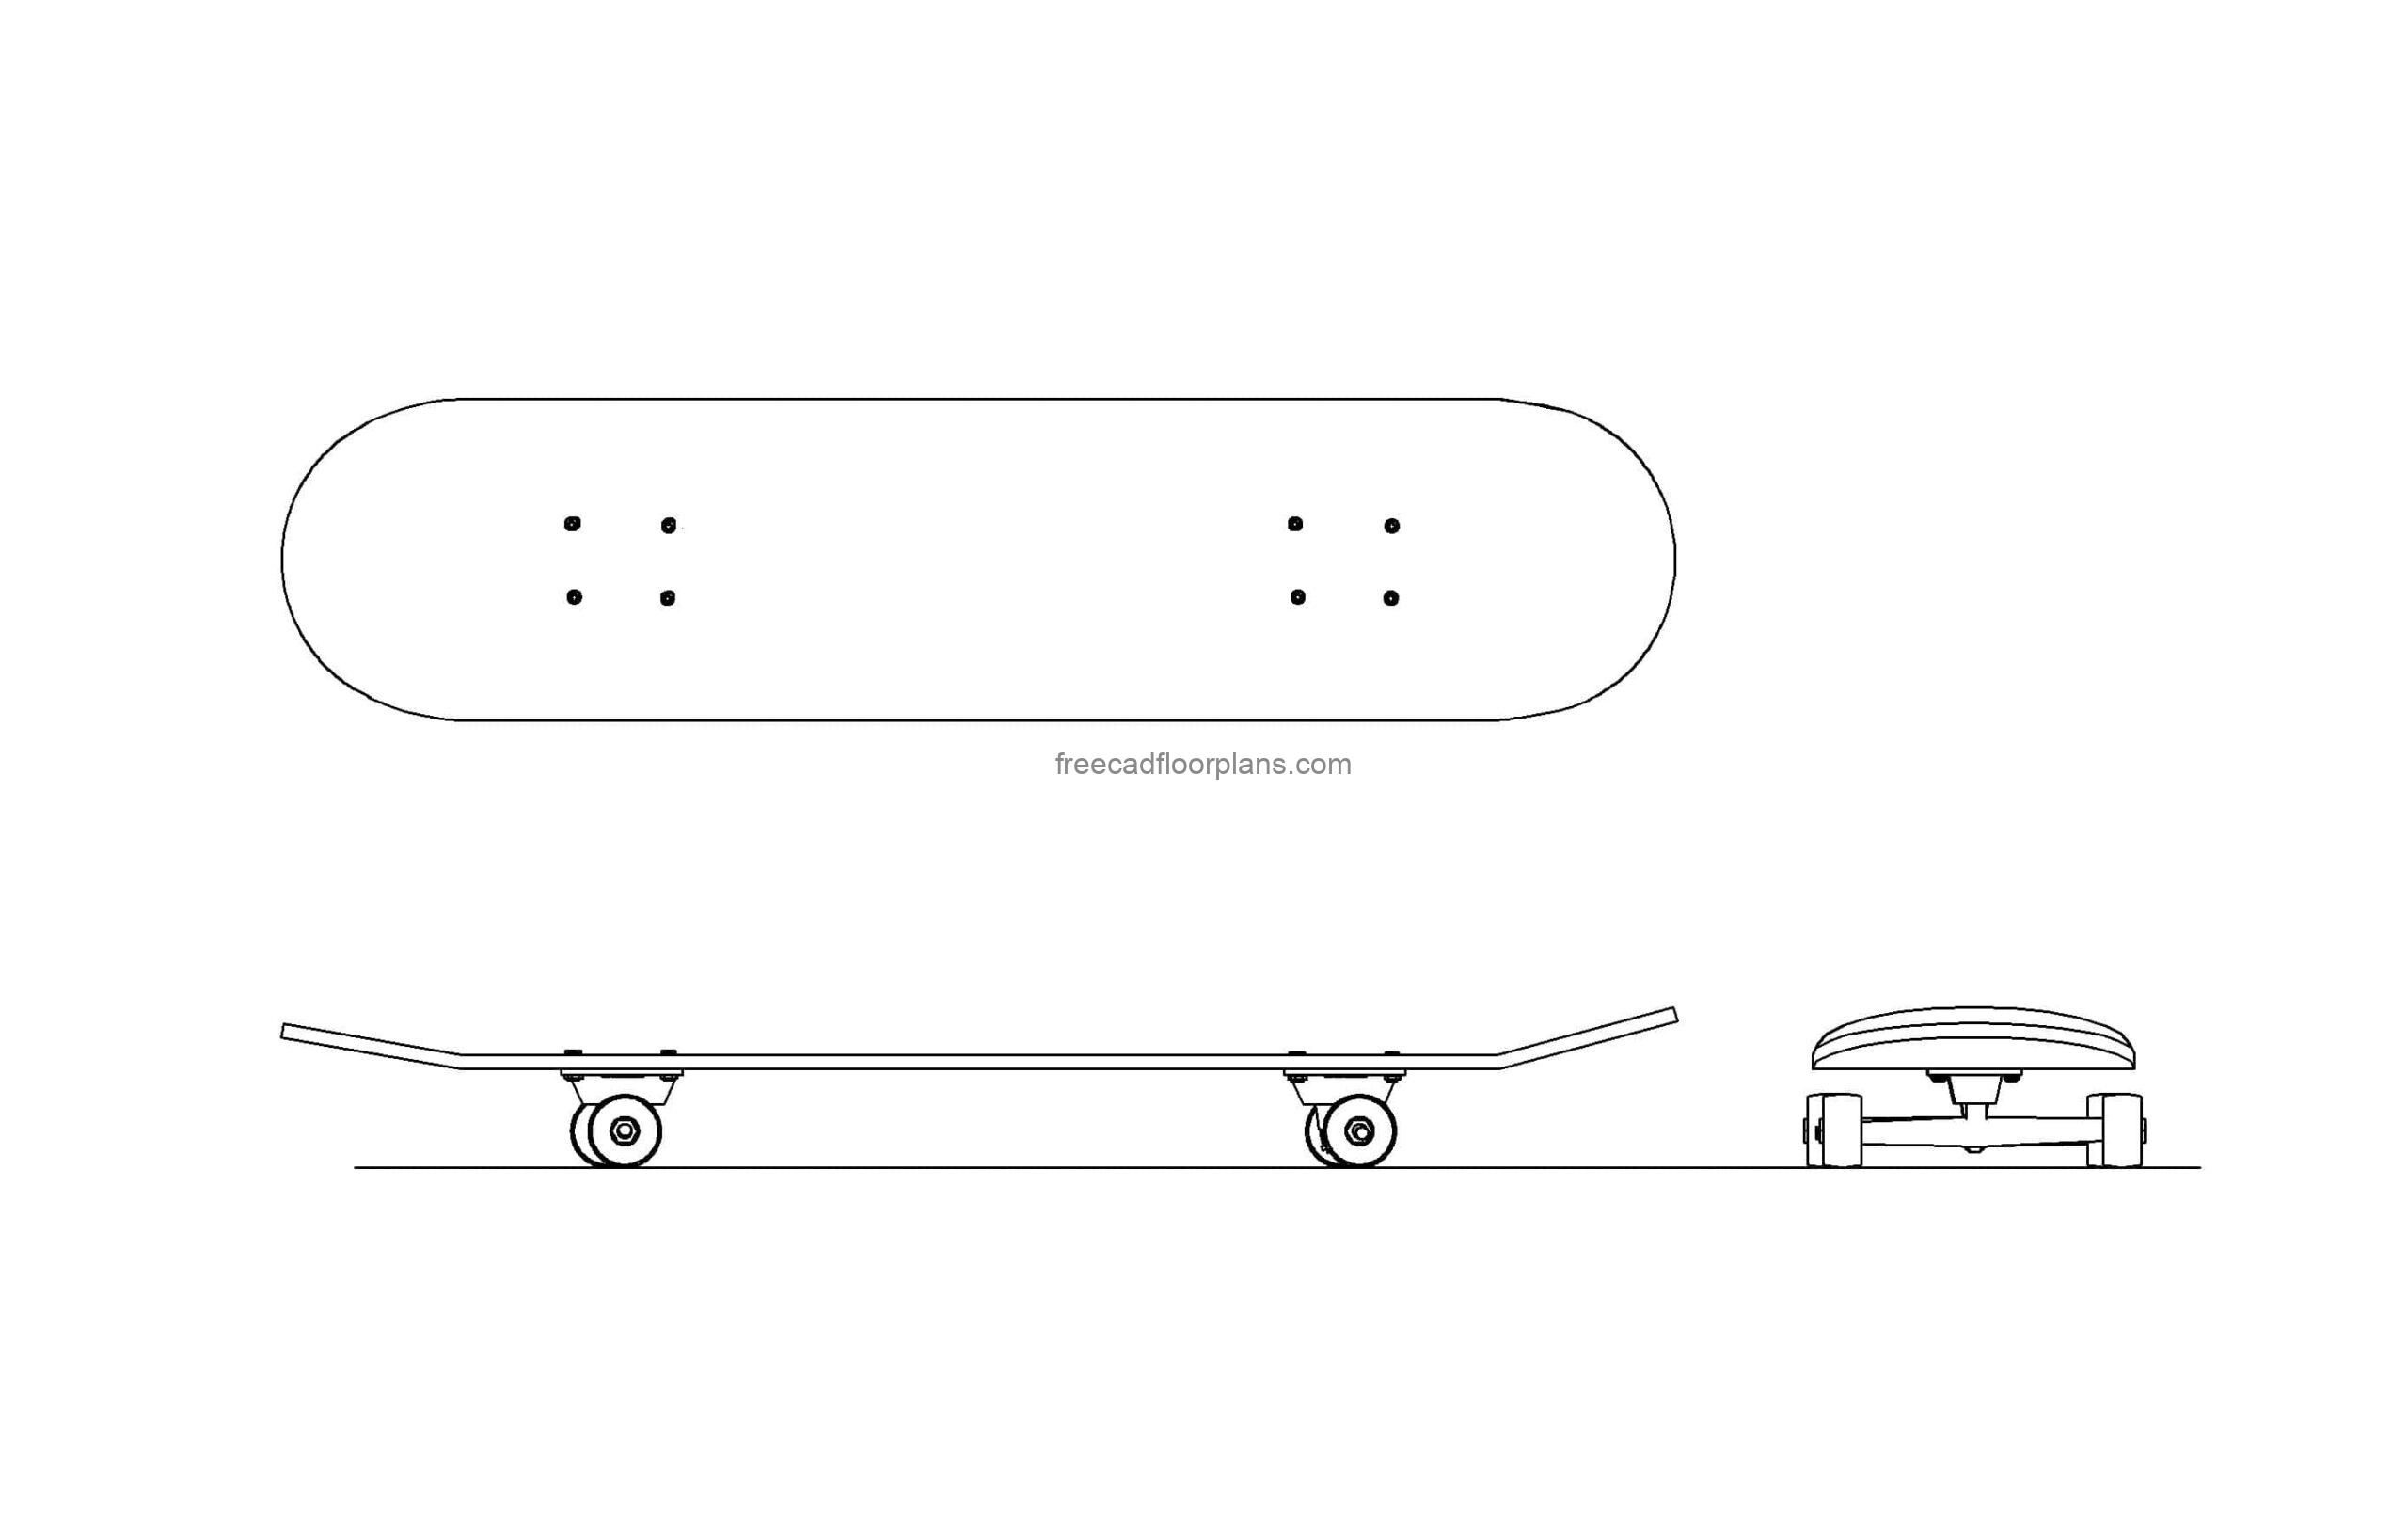 autocad 2d drawing of a skateboard plan and elevations views, dwg file for free download